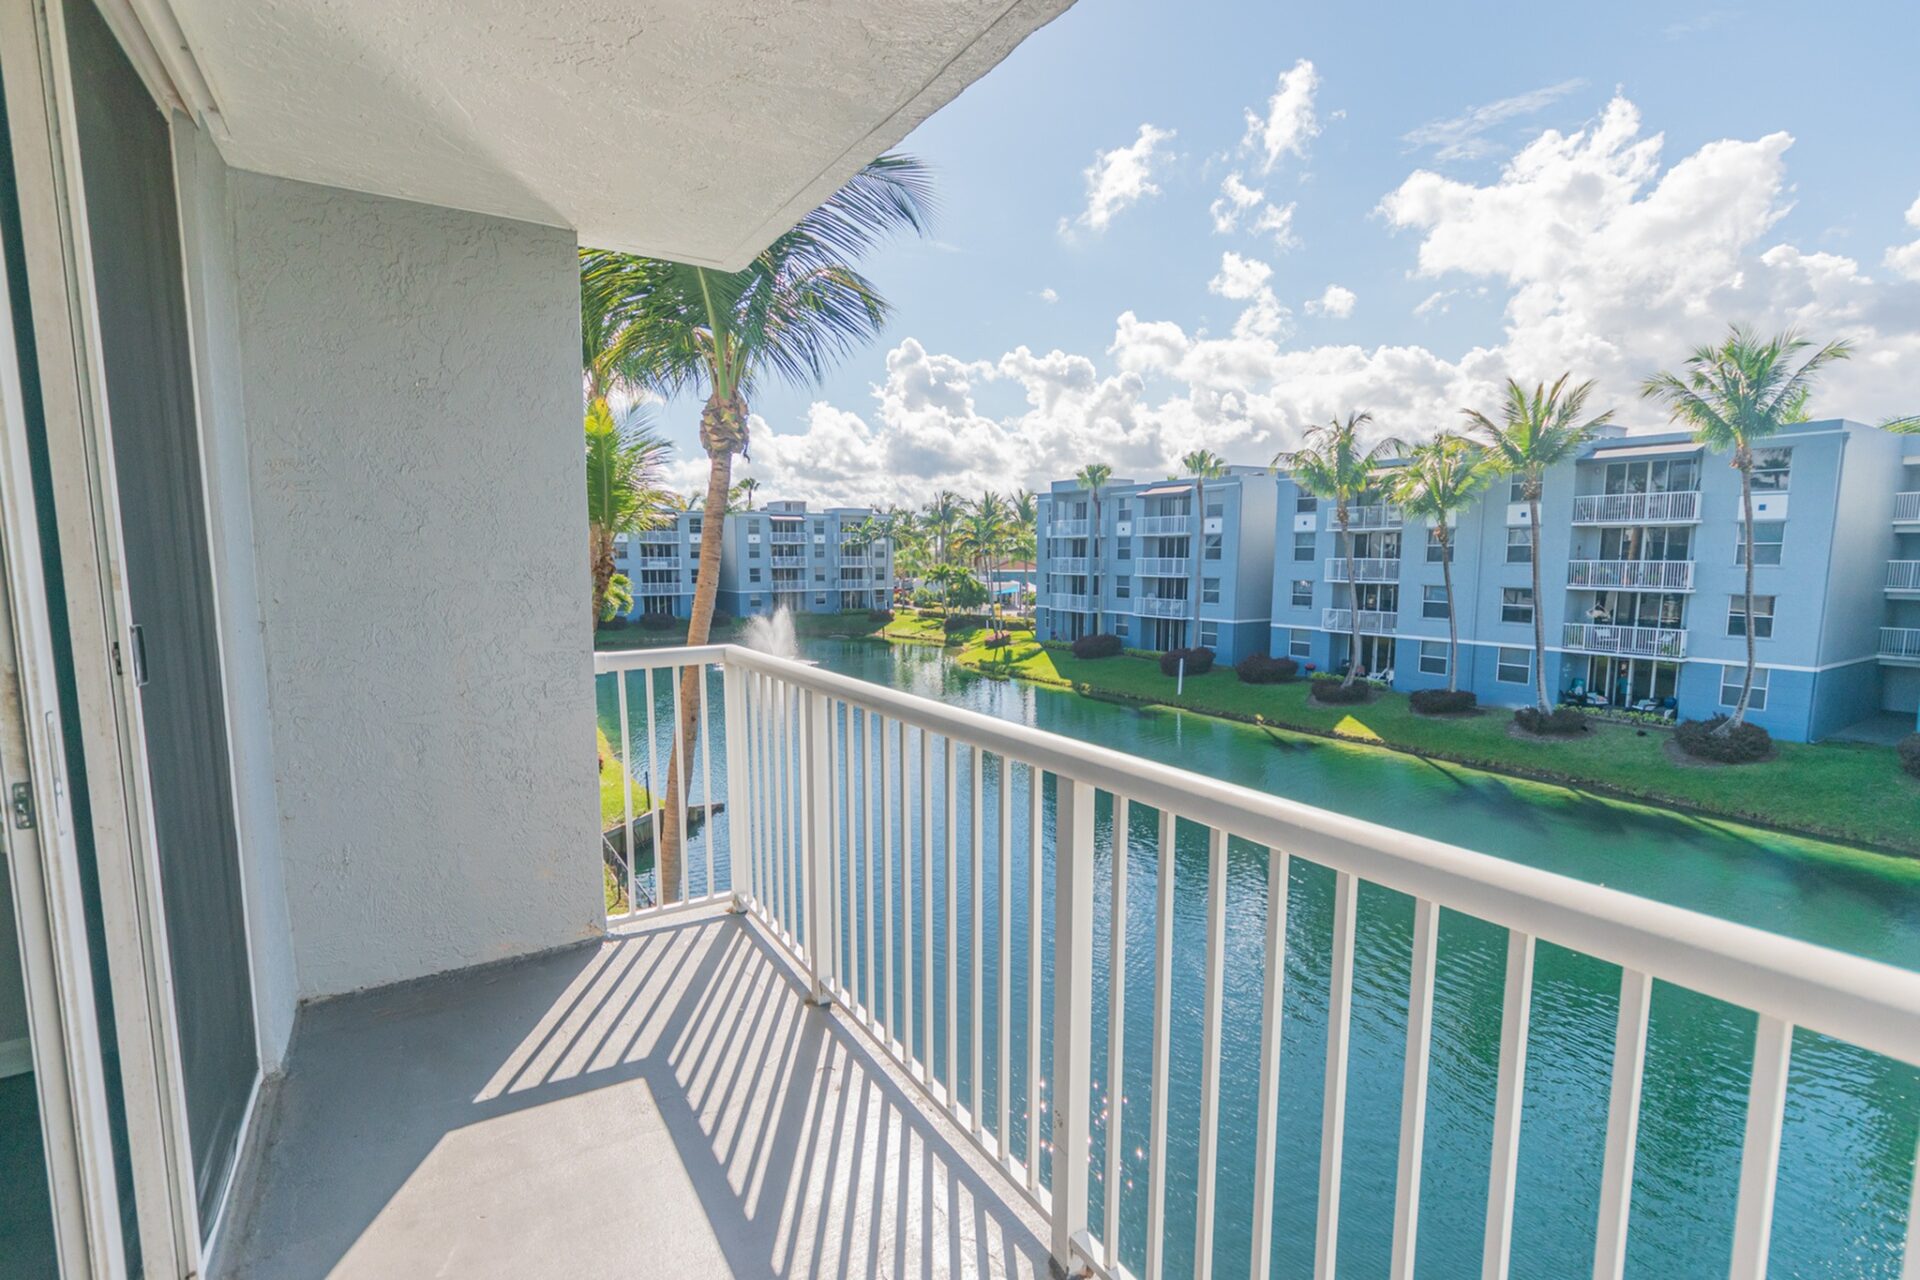 Balcony view of Beachwalk at Sheridan apartments with a lake in the middle.